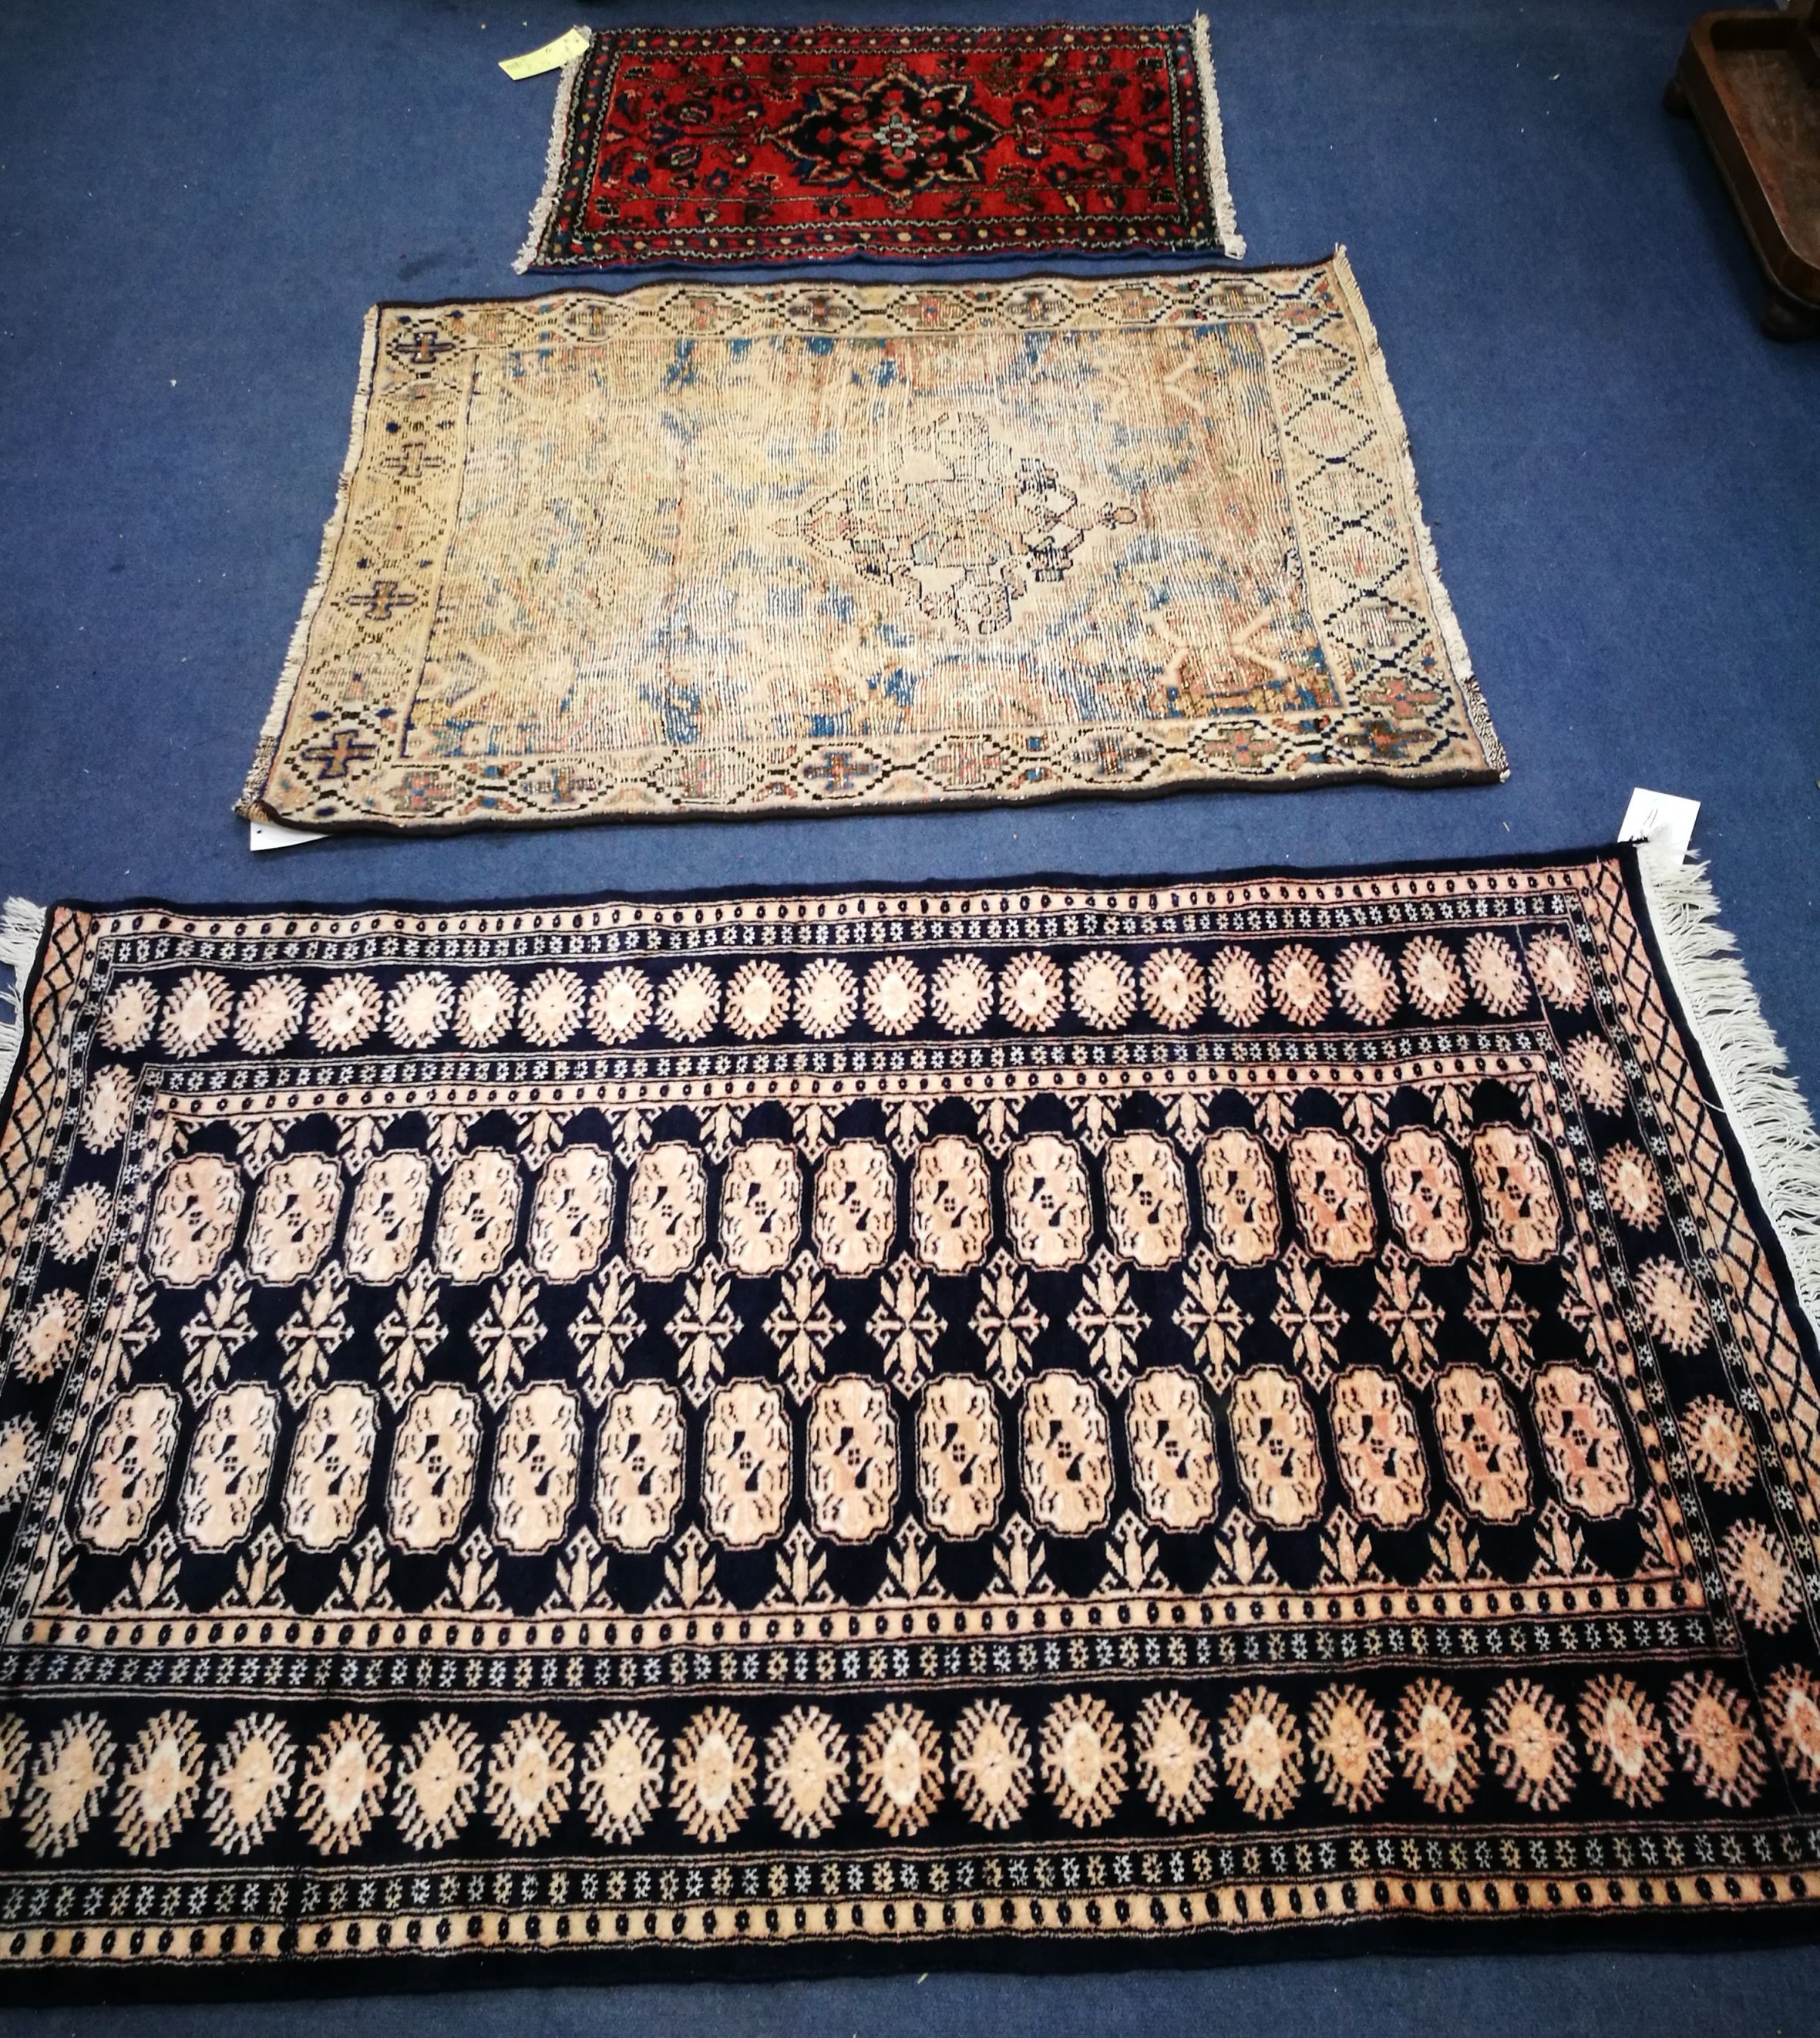 Two North West Persian rugs and a Bokhara rug 84 x 60cm, 120 x 86cm and 149 x 92cm - Image 2 of 2